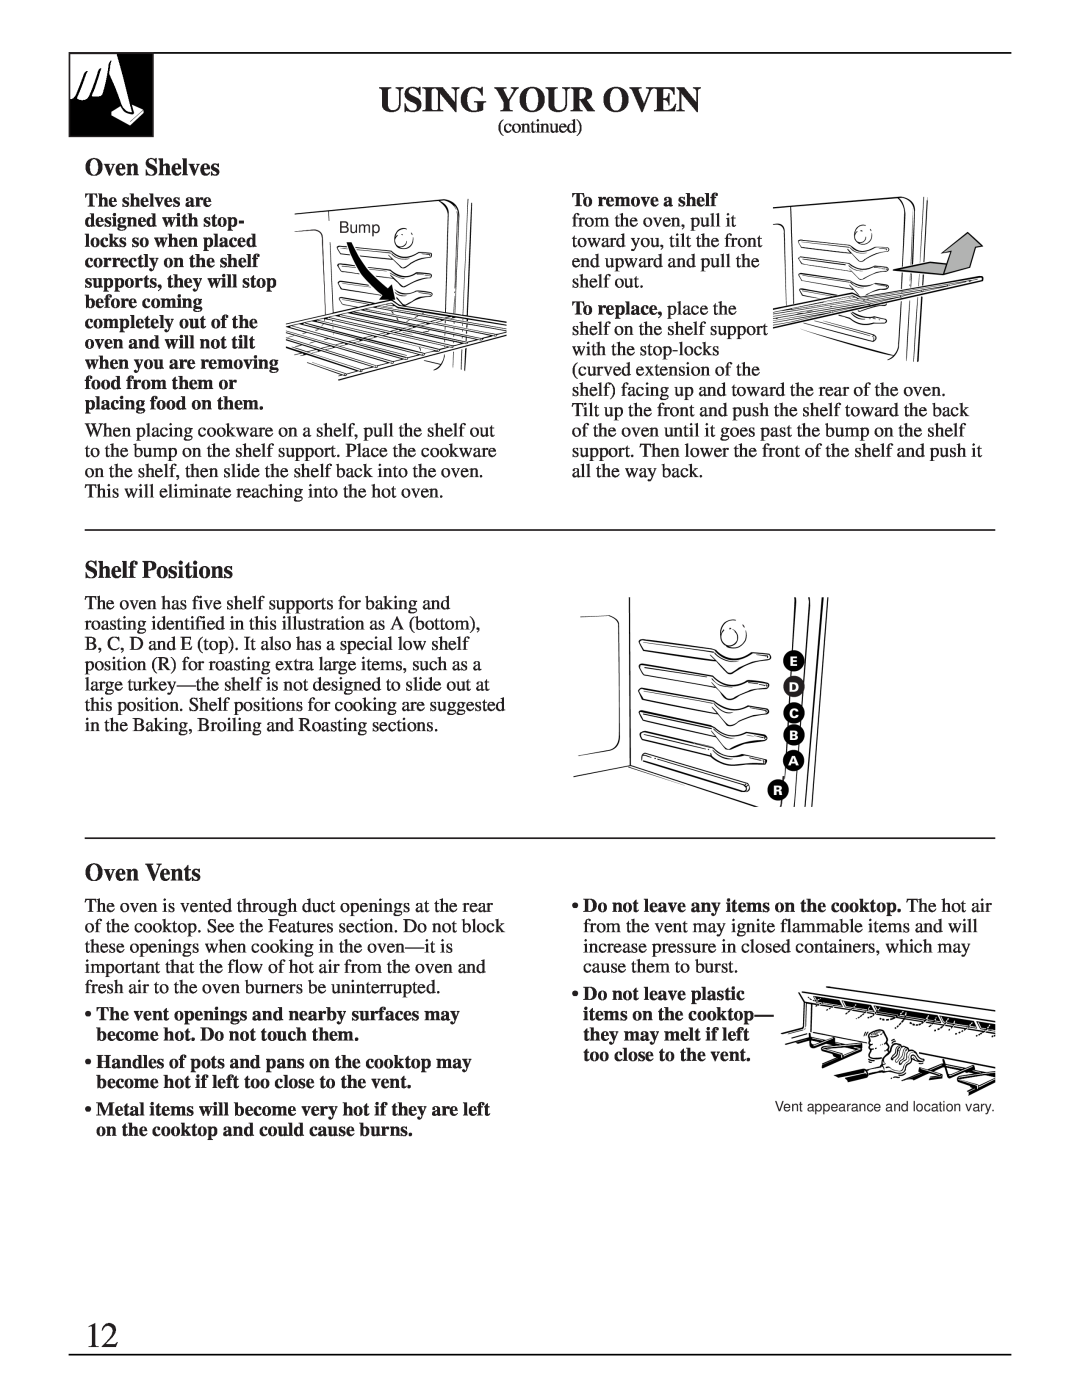 GE XL44TM Oven Shelves, Shelf Positions, Oven Vents, Using Your Oven, The shelves are, designed with stop, before coming 